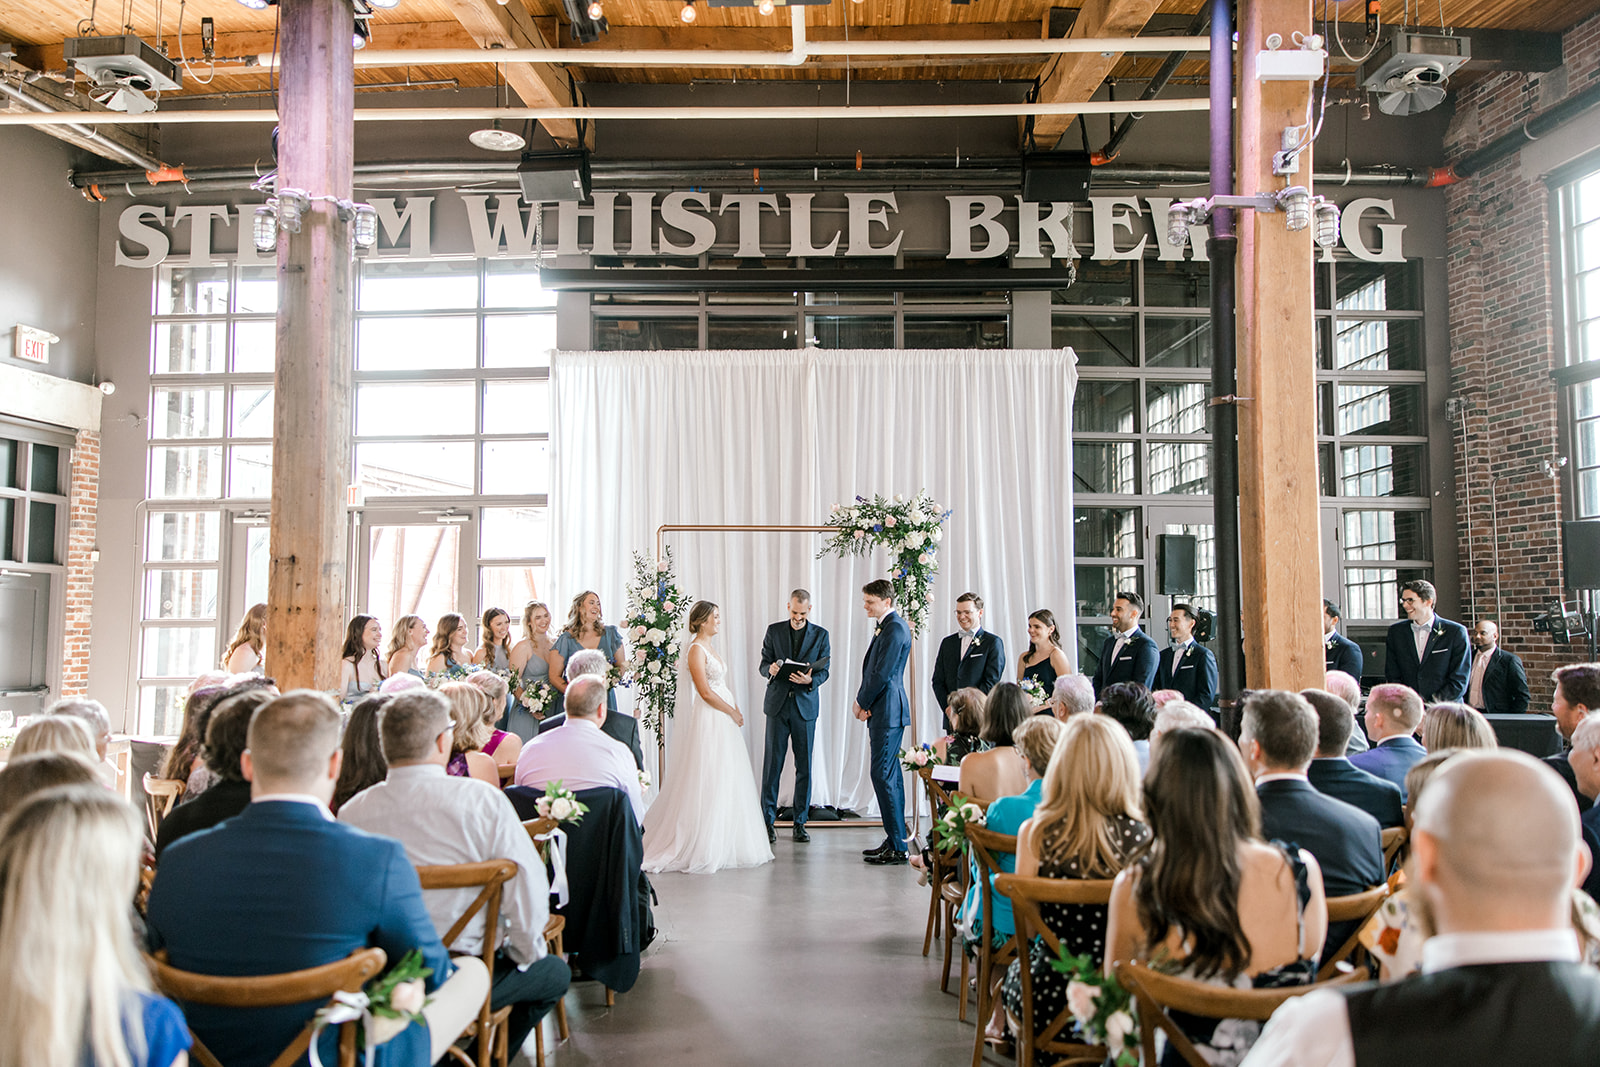 Couple stands during ceremony at Steam Whistle Brewing, Pilsner Hall in Toronto, Ontario